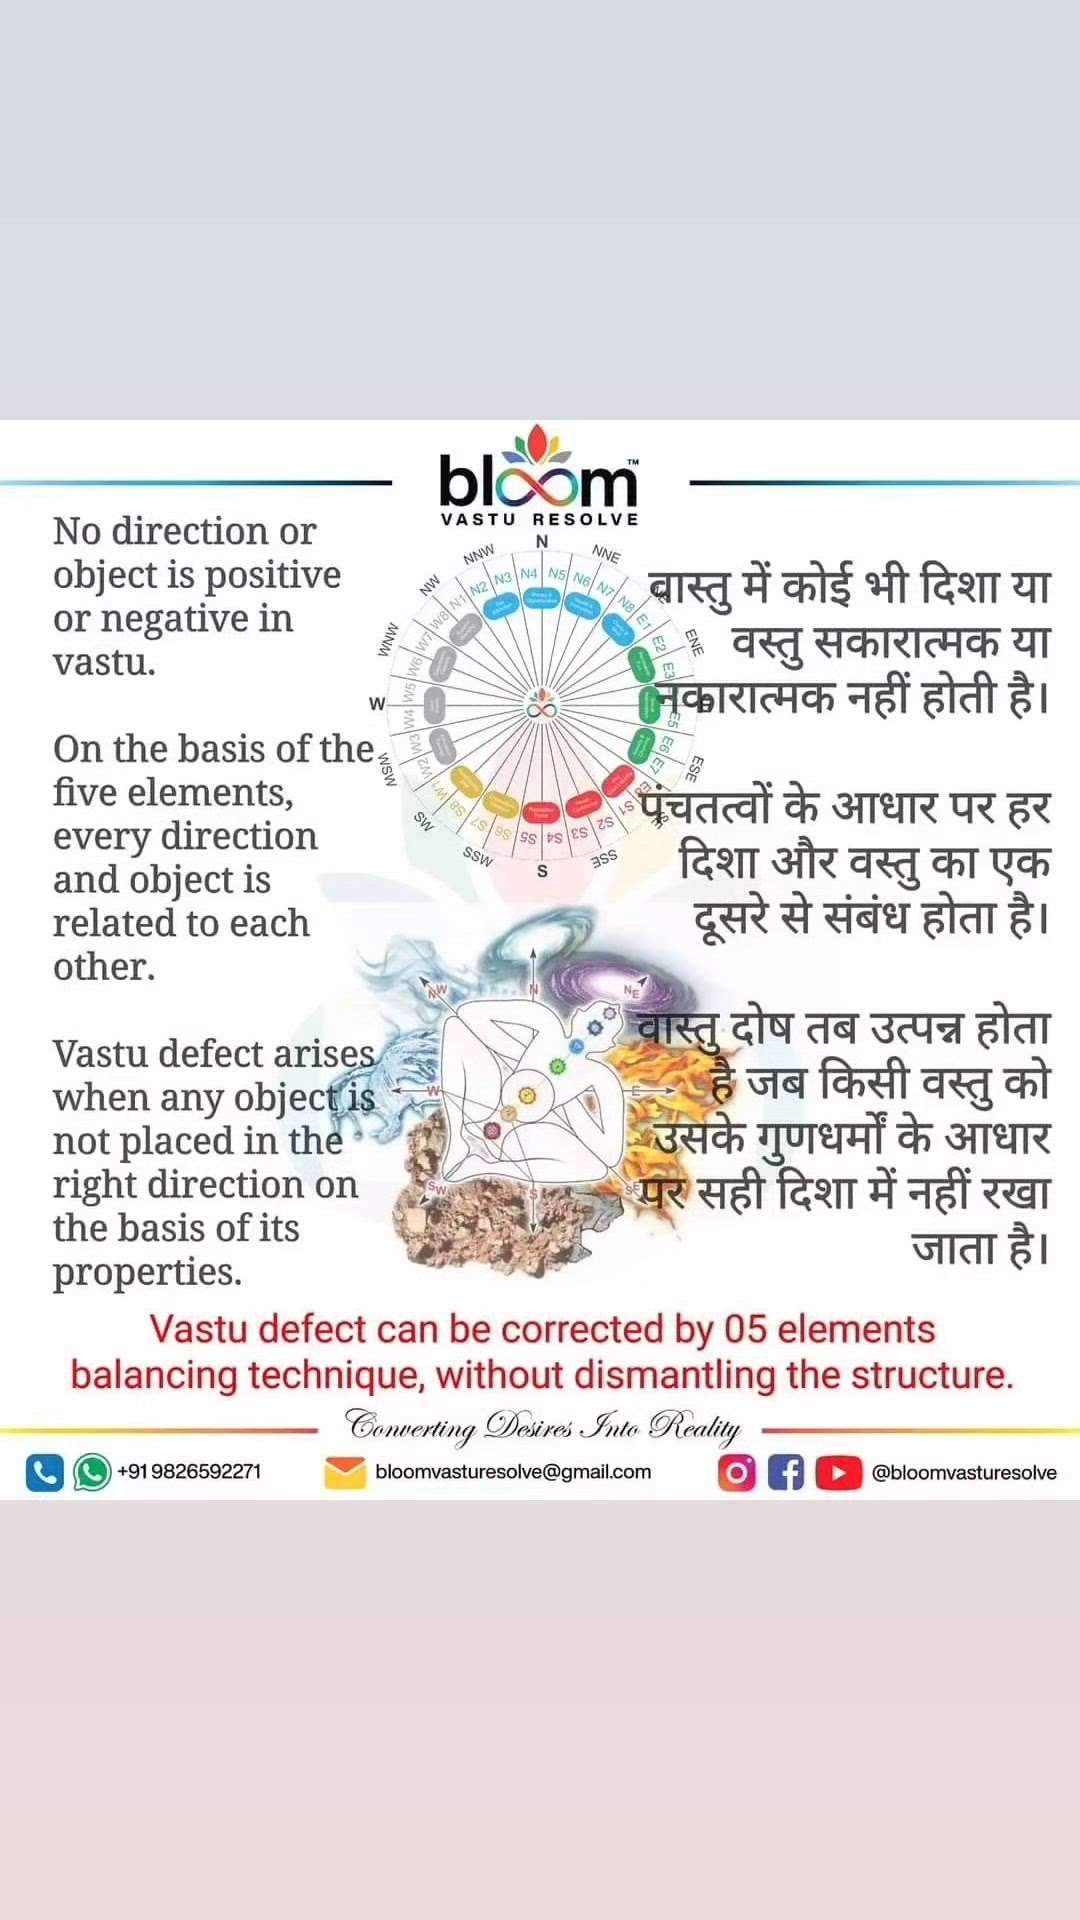 To know more Vastu, follow social media account (Facebook/Instagram/Youtube) @bloomvasturesolve.
For any query your comments are always welcome.

#mahavastu 
#vastu 
#vastuexpert 
#bloomvasturesolve 
#entrance 
#panchtatva
#vastulogy 
#bhopal